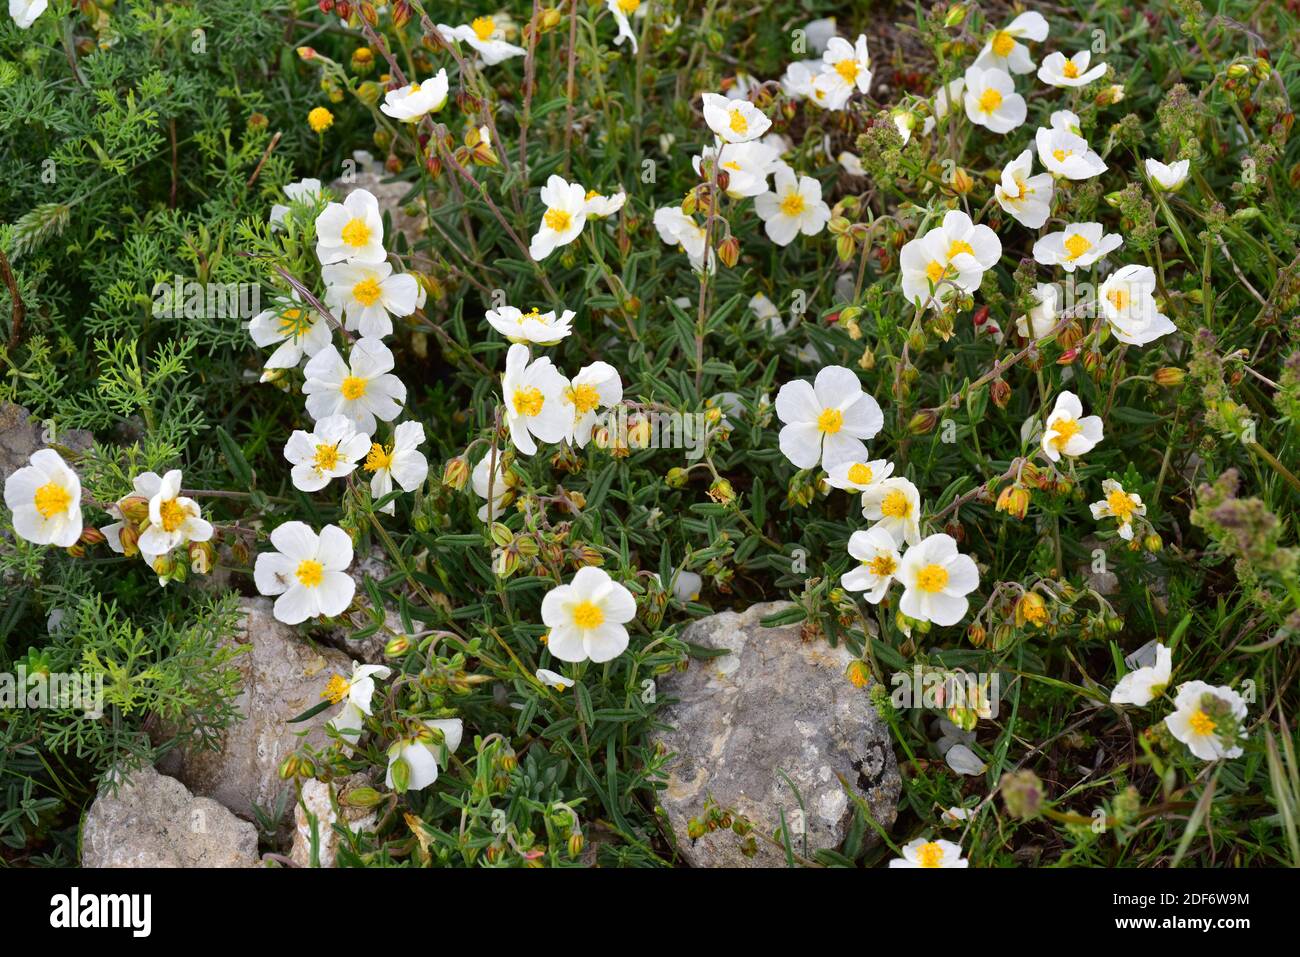 White rock-rose (Helianthemum apenninum) is a subshrub native to Spain, France, Italy, Greece and northwestern Africa. This photo was taken in La Stock Photo